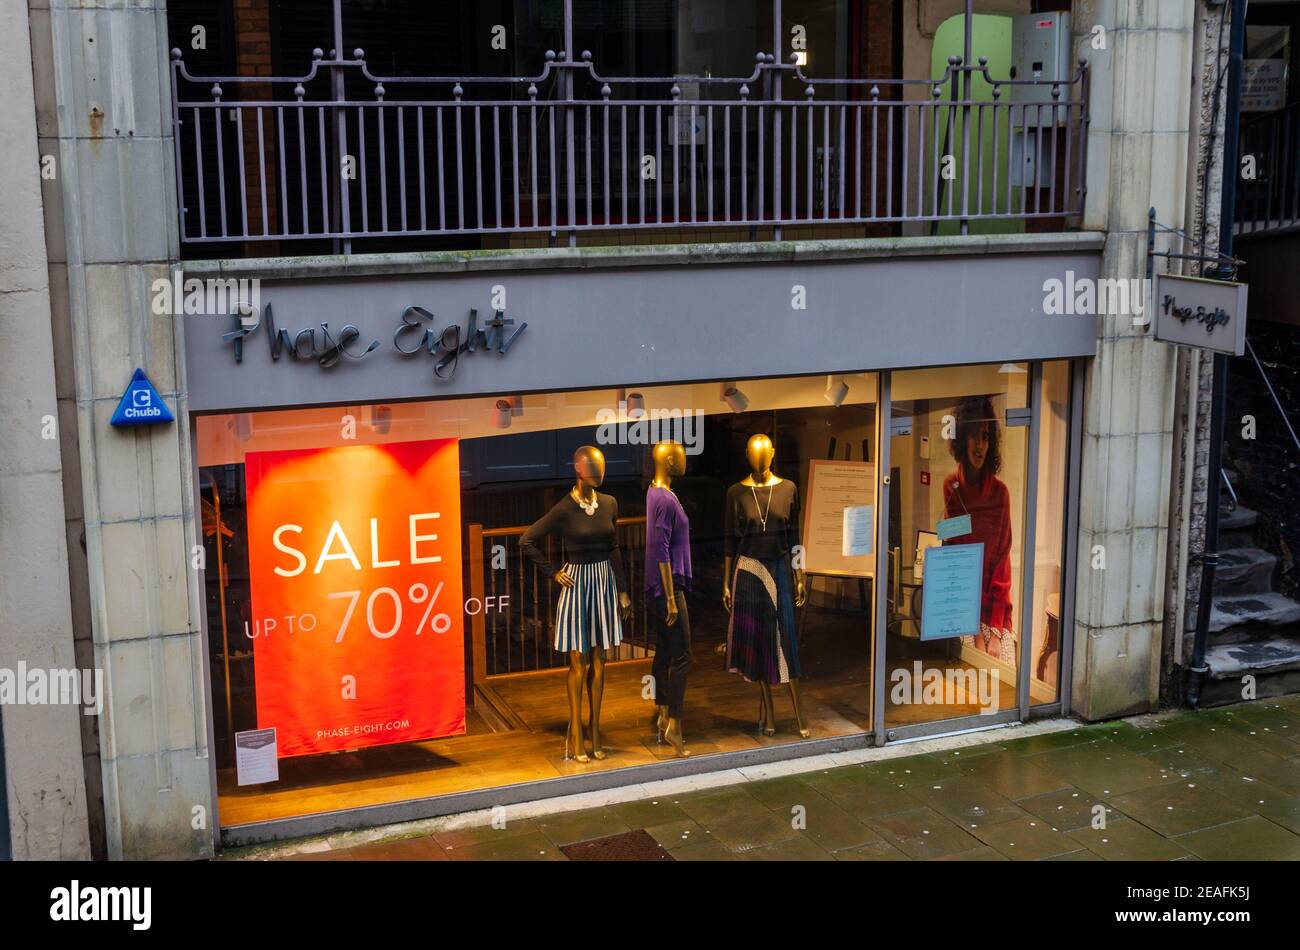 Chester; UK: Jan 29, 2021: The Phase Eight store on Watergate Street has window displays advertising a sale with up to 70% off. They are currently tem Stock Photo